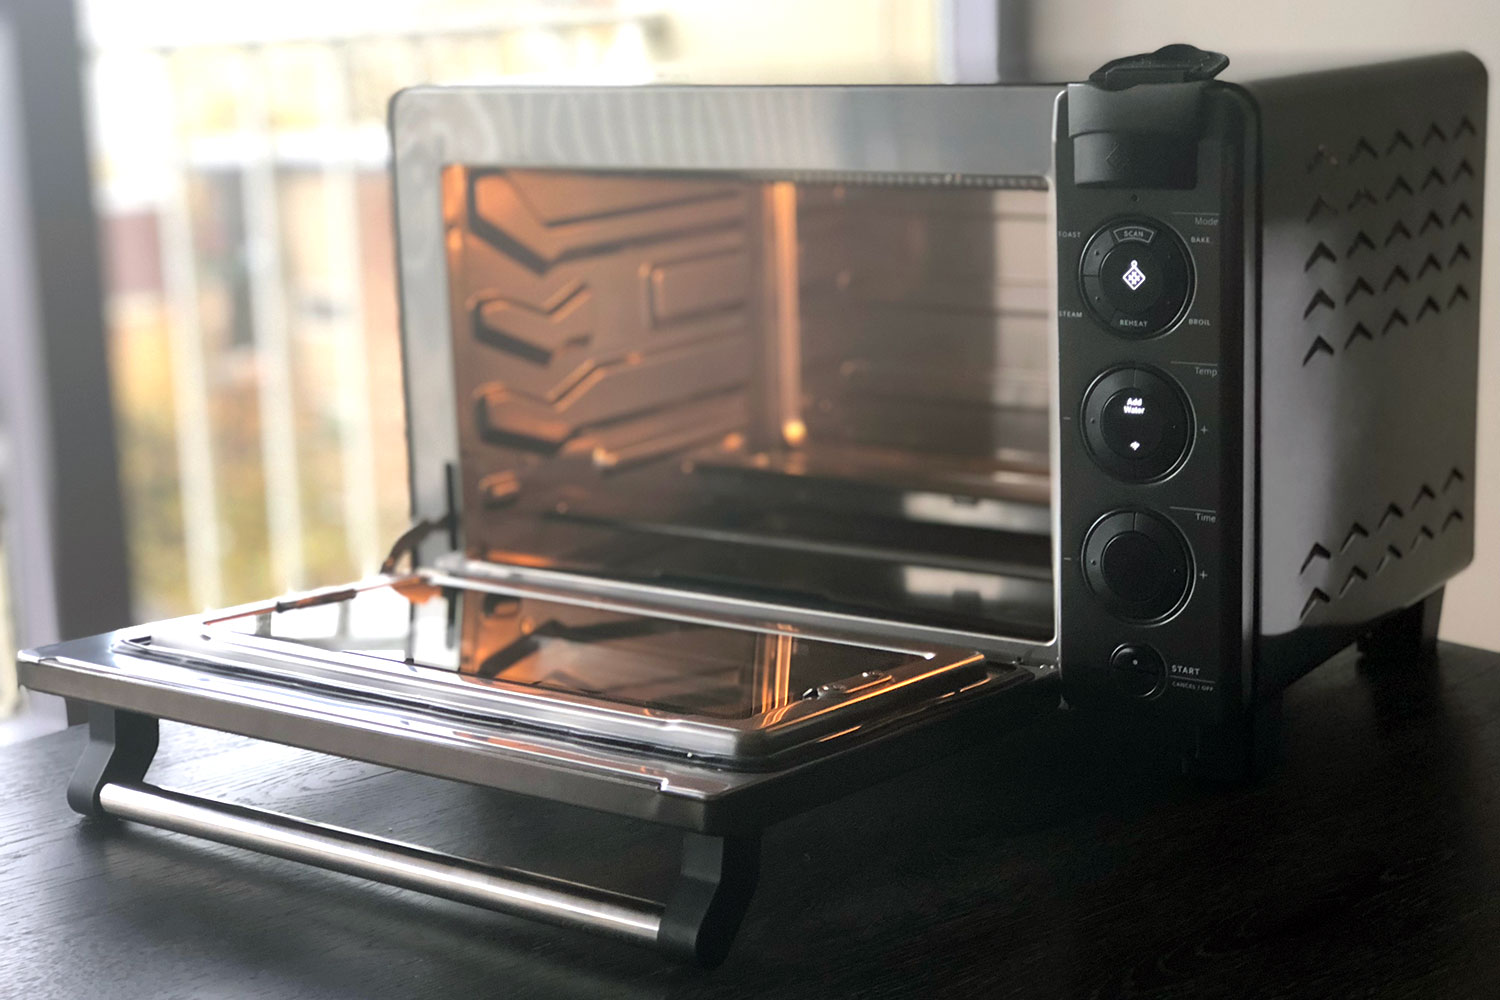 https://www.digitaltrends.com/wp-content/uploads/2018/11/tovala-steam-oven-review-3.jpg?fit=720%2C720&p=1